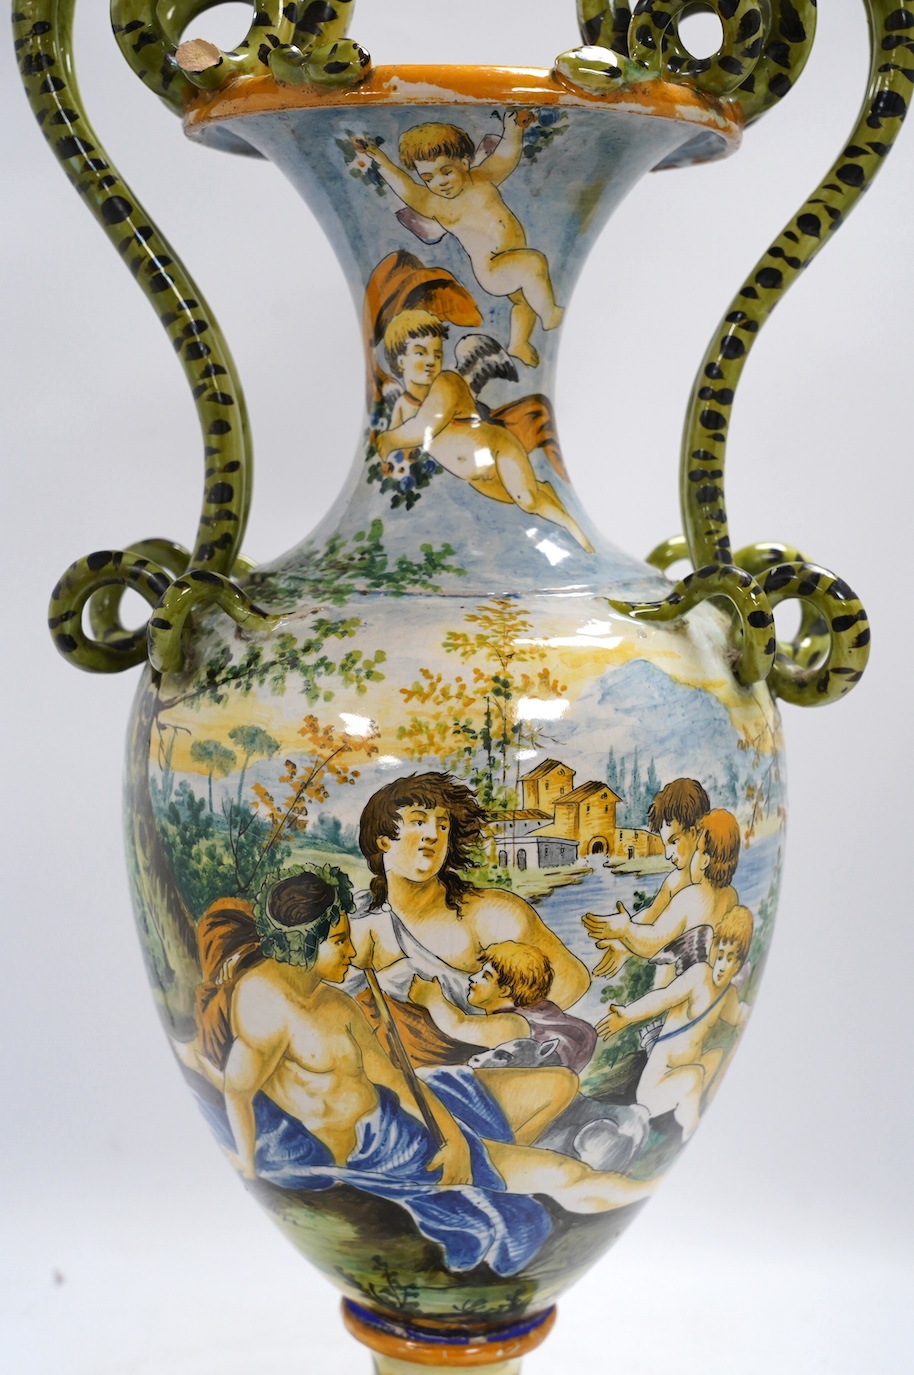 A tall late 19th/early 20th century Italian maiolica vase in Cantagalli style, with blue ‘M’ and crown mark, 66cm. Condition - poor